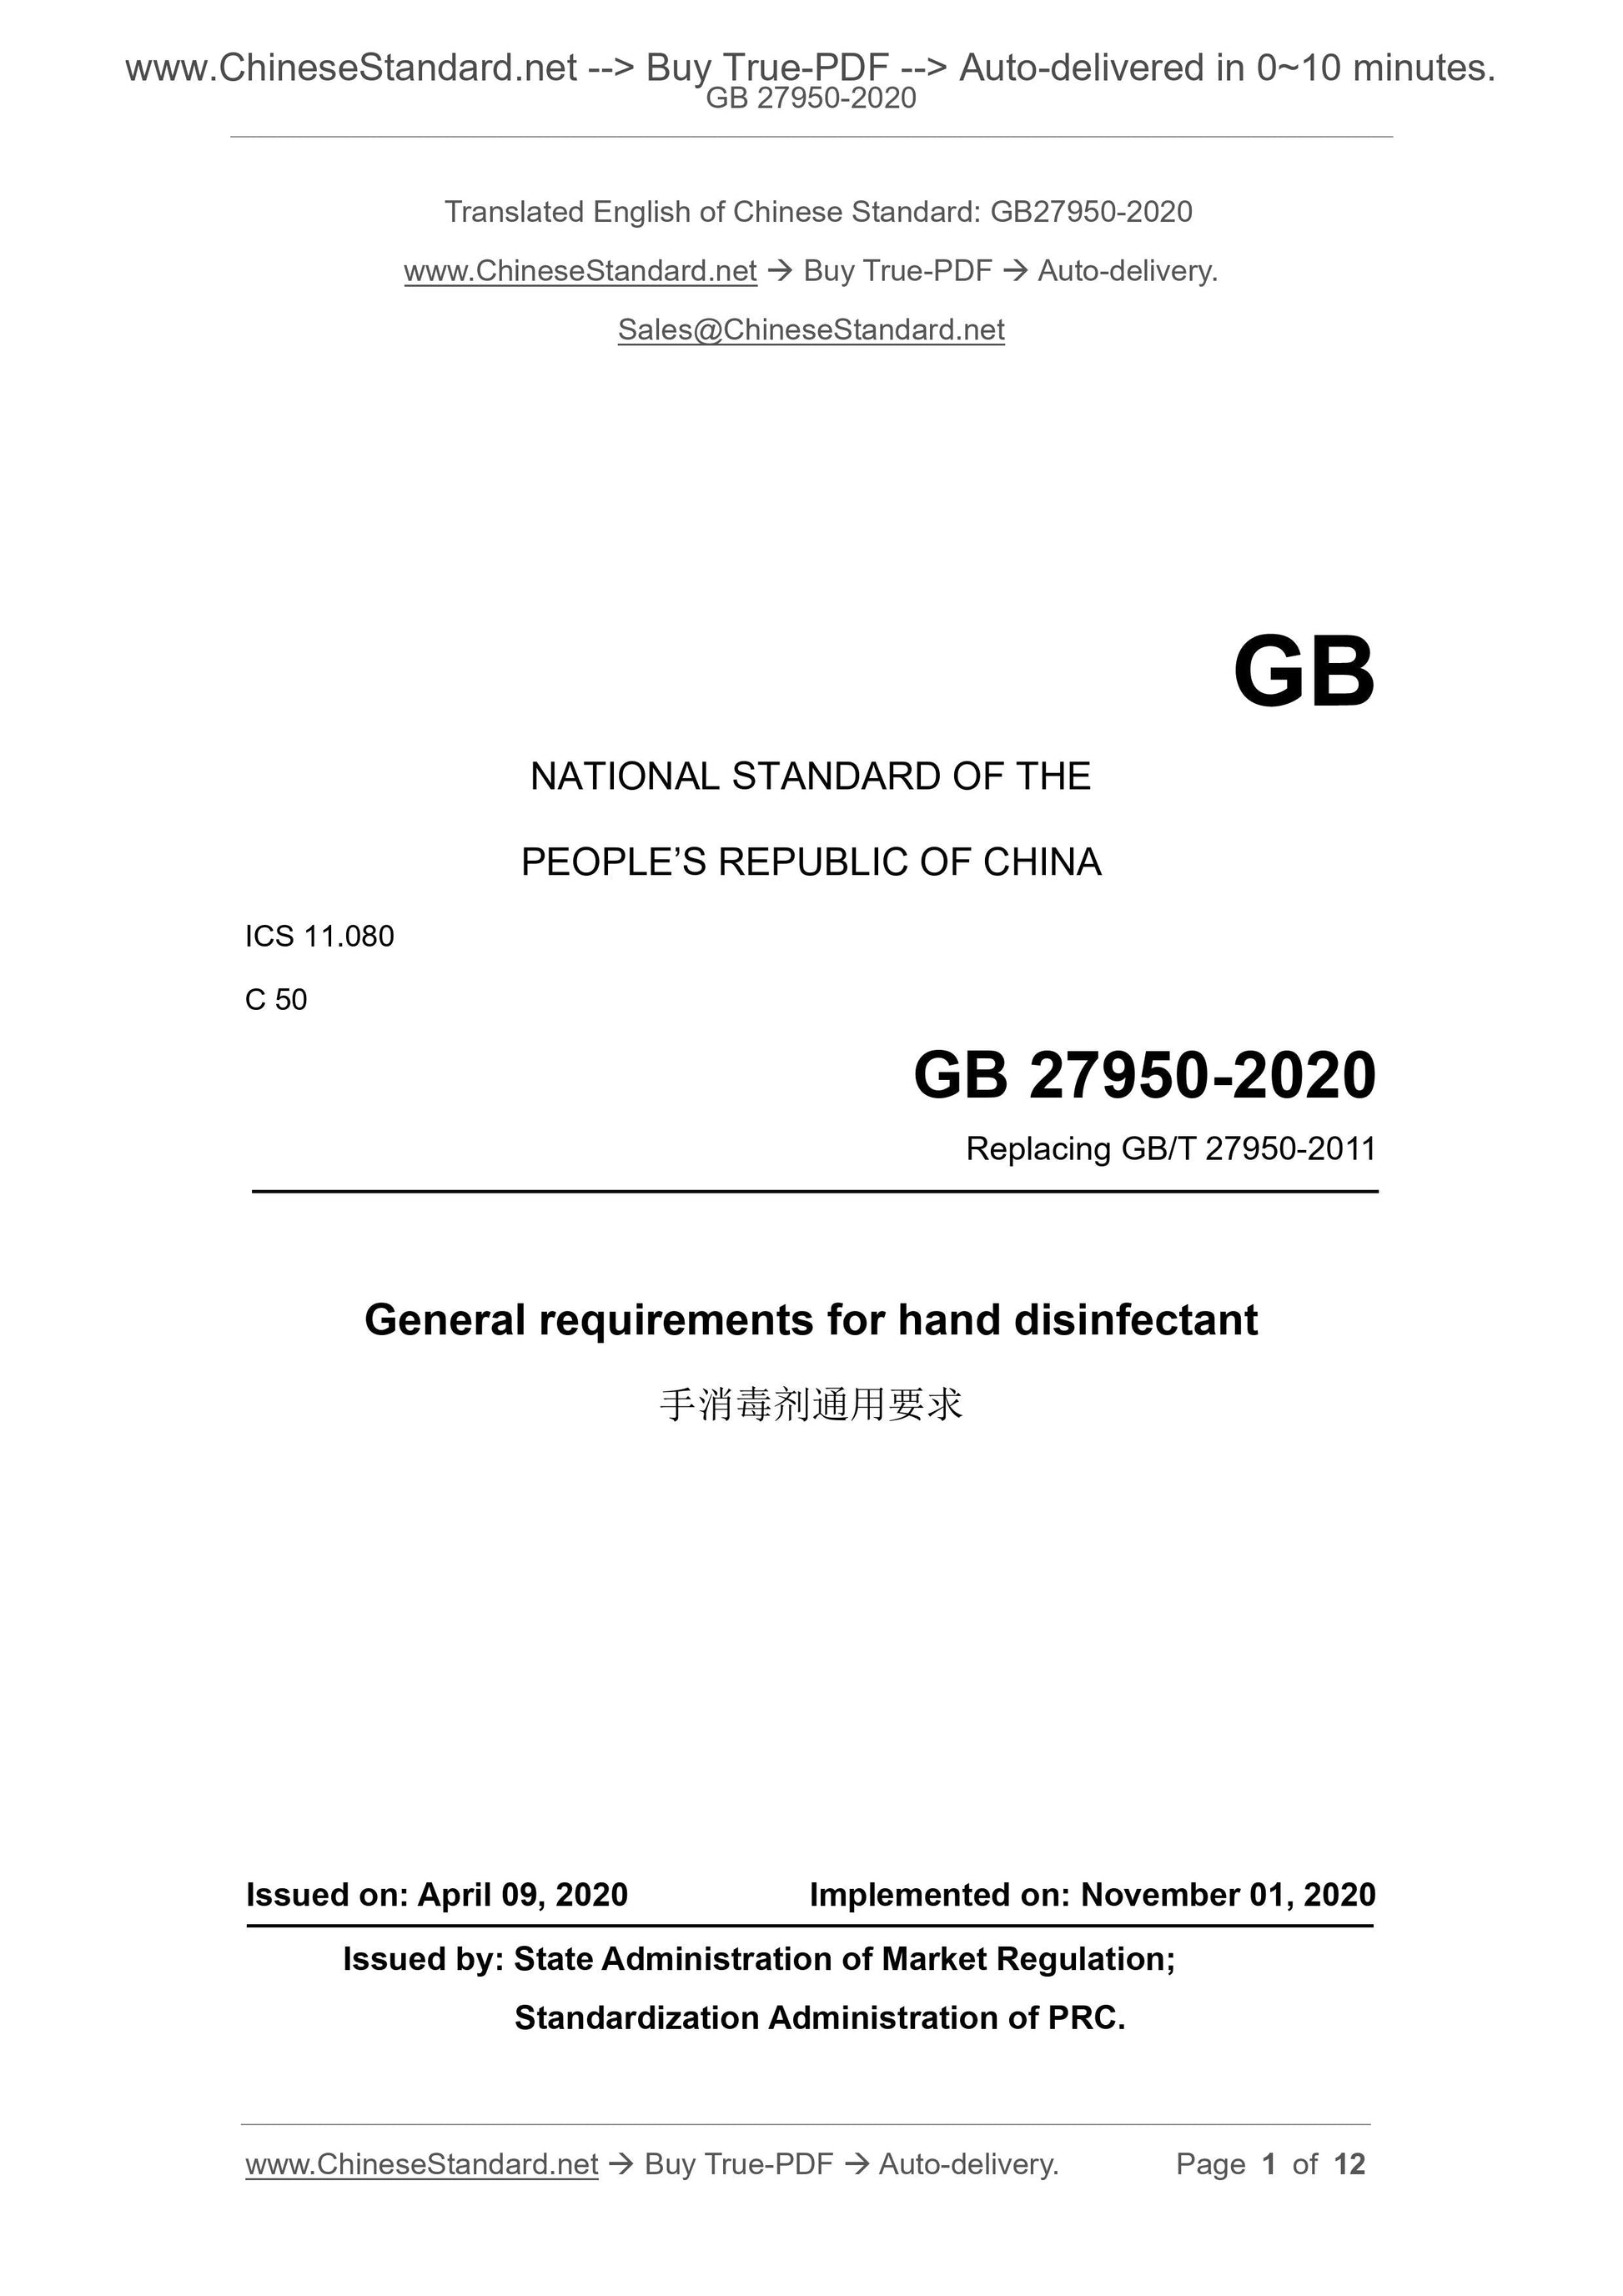 GB 27950-2020 Page 1